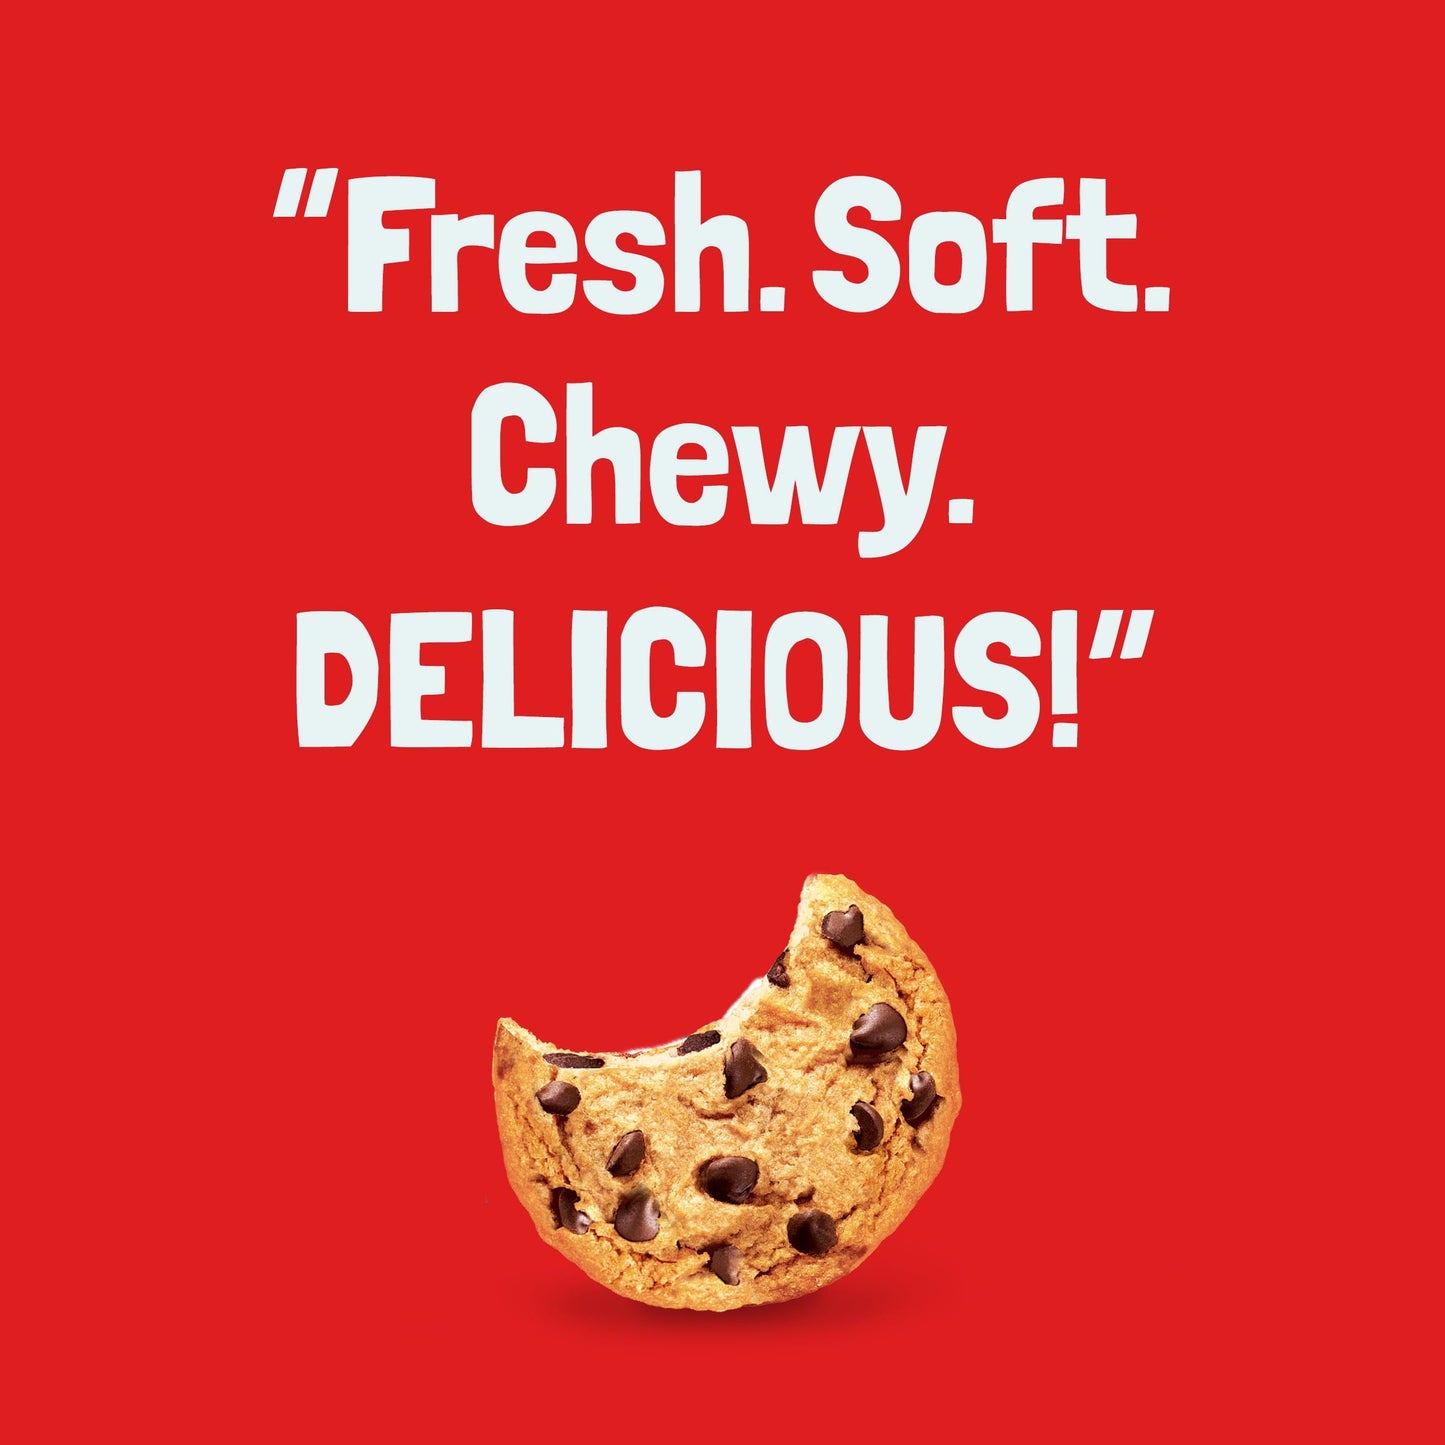 CHIPS AHOY! Chewy Chocolate Chip Cookies, Family Size, 19.5 oz